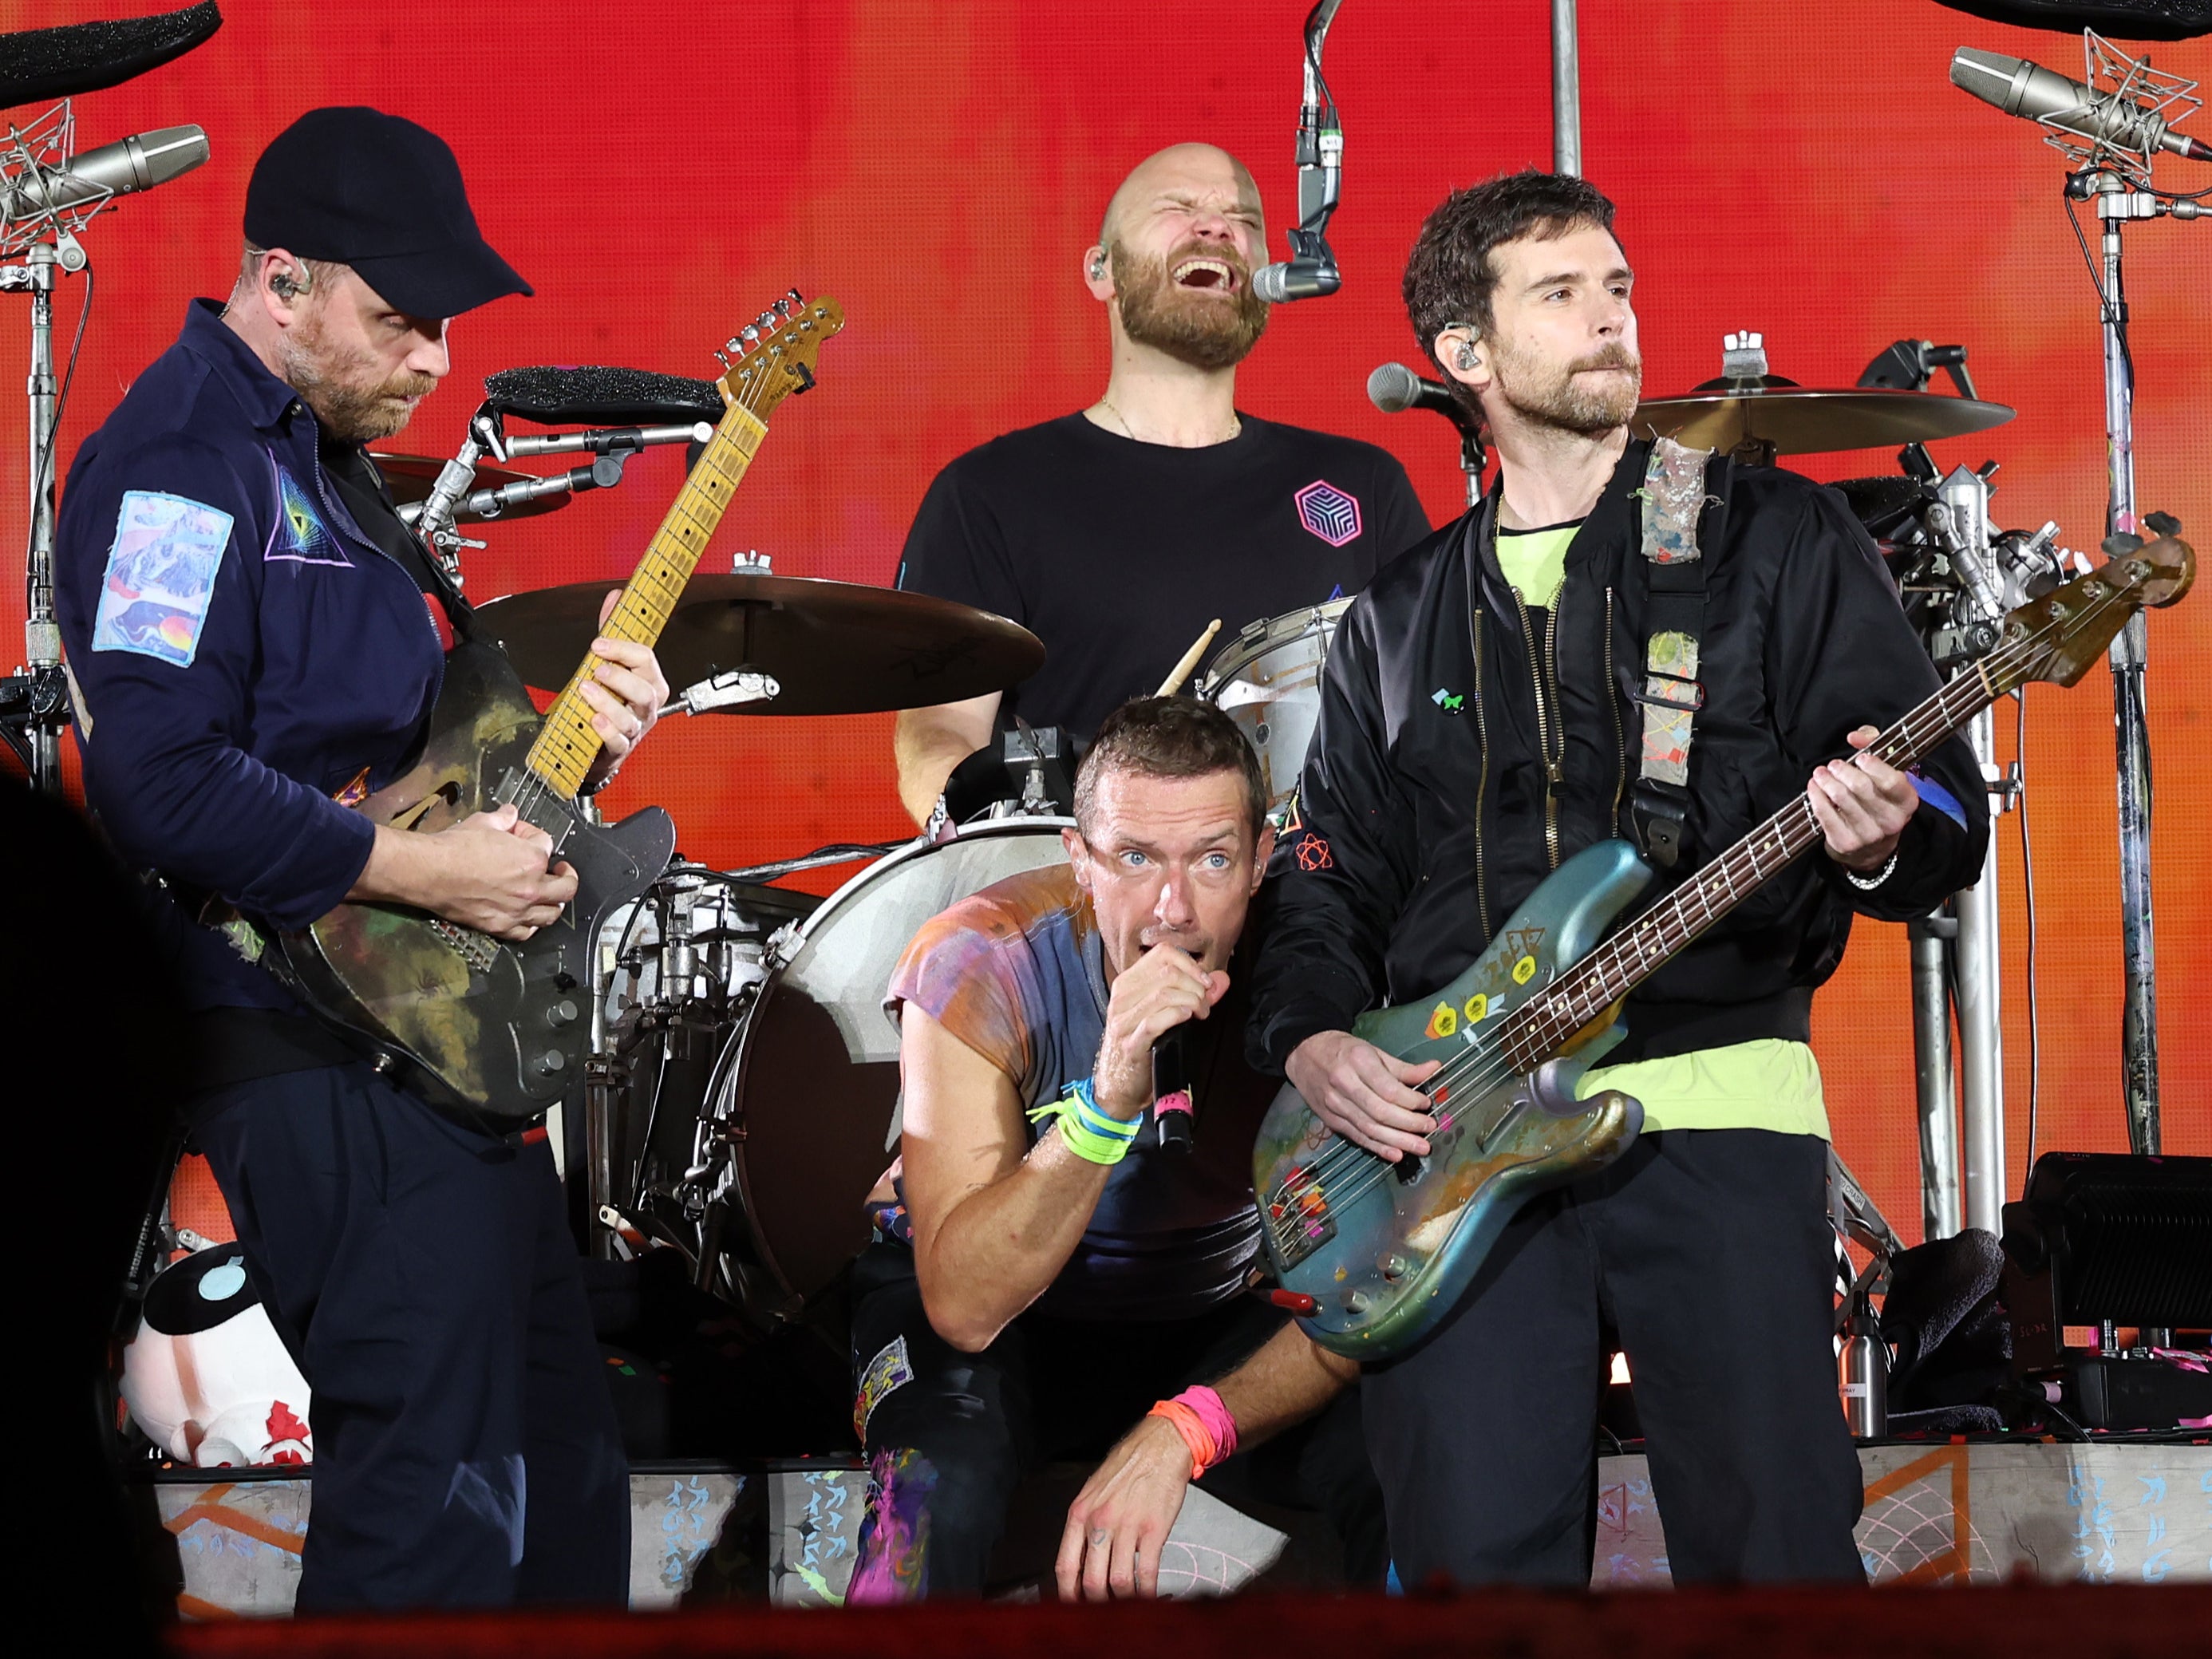 coldplay, glastonbury, pyramid stage, rock band, band, chris martin, british, grammys, awards, how to, when are coldplay performing on the pyramid stage at glastonbury and how to watch